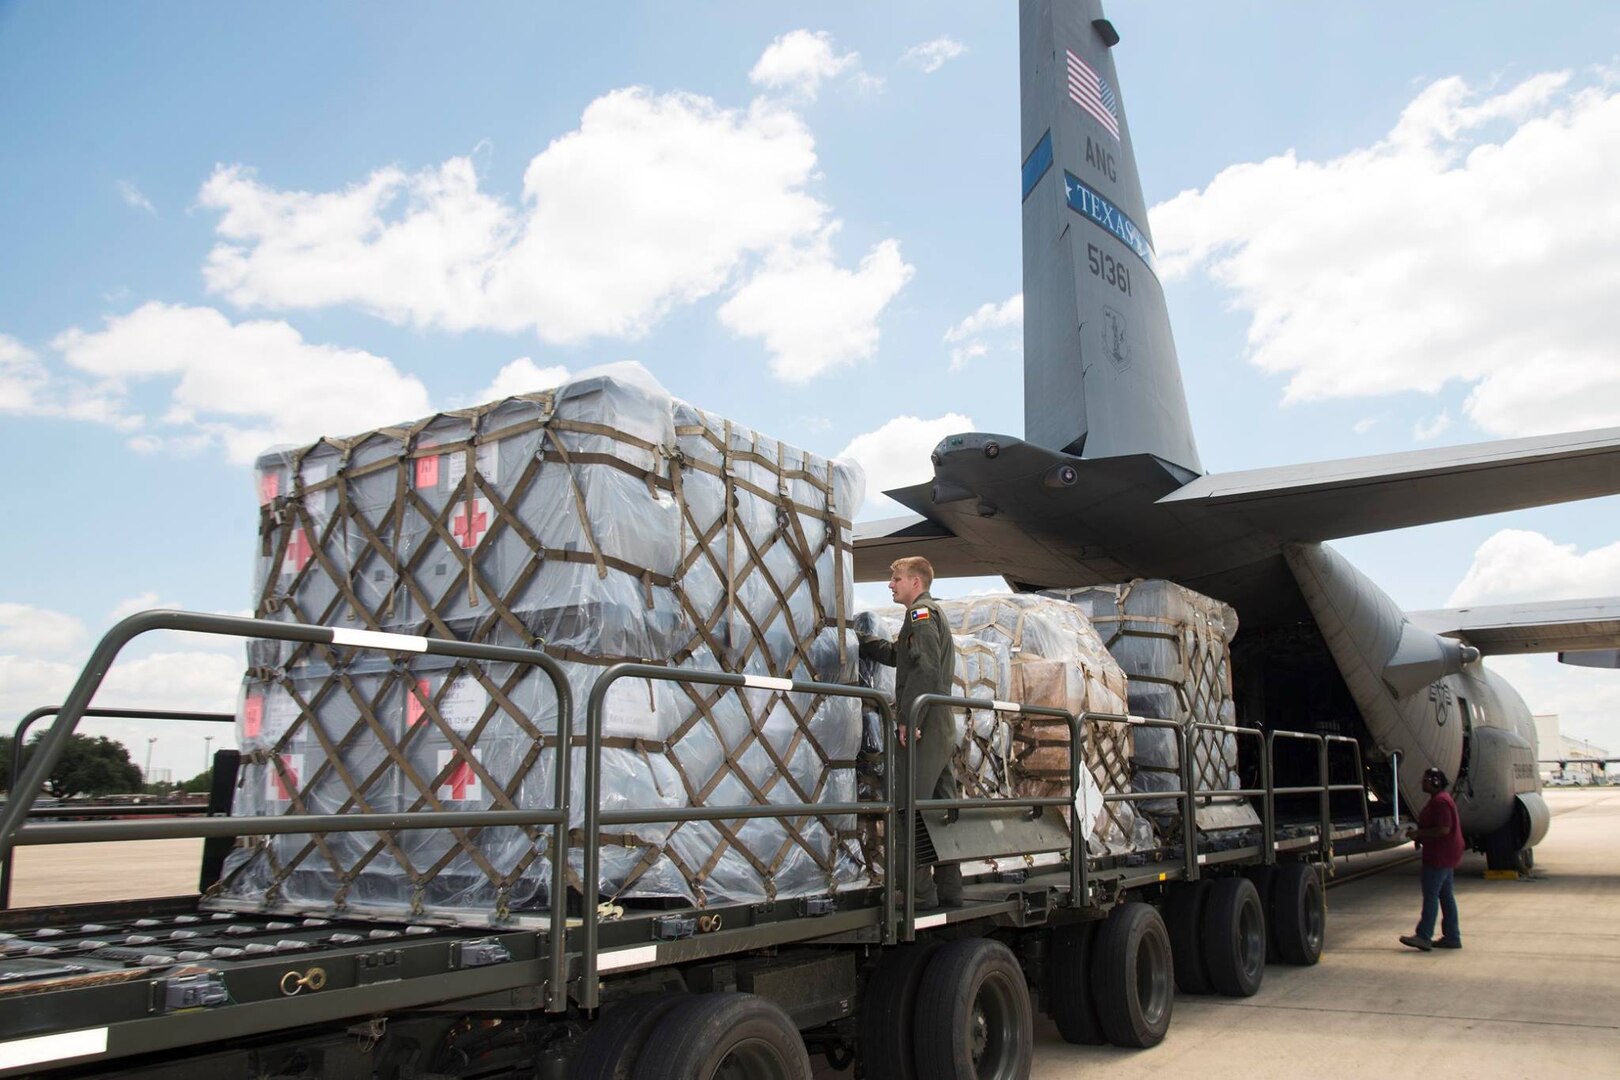 Pallets of supplies on flatbed trailer being loaded onto C-130 cargo plane